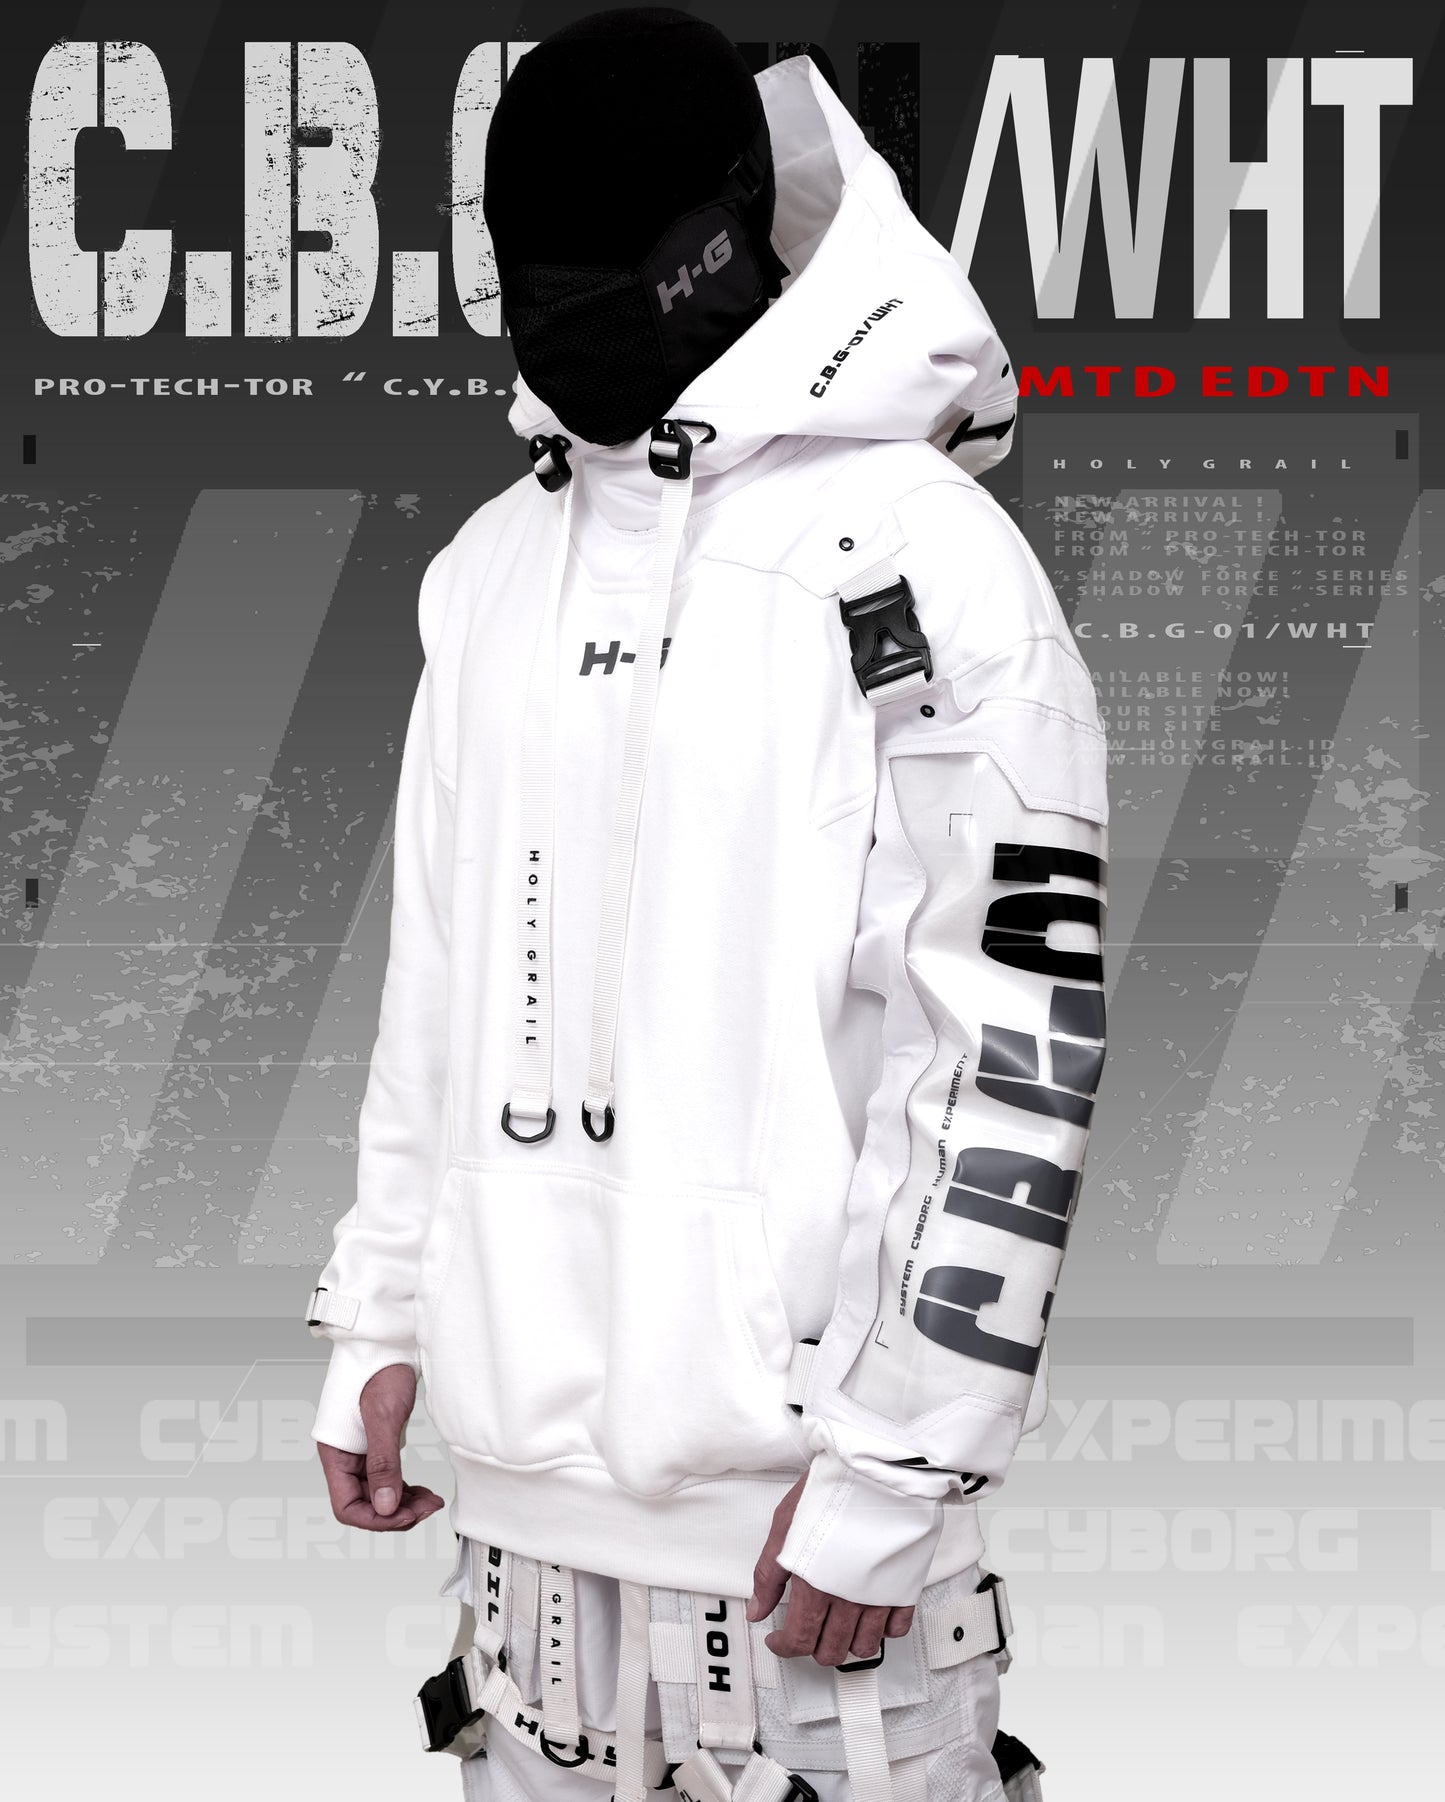 C.B.G-01/WHT( SOLD OUT! )